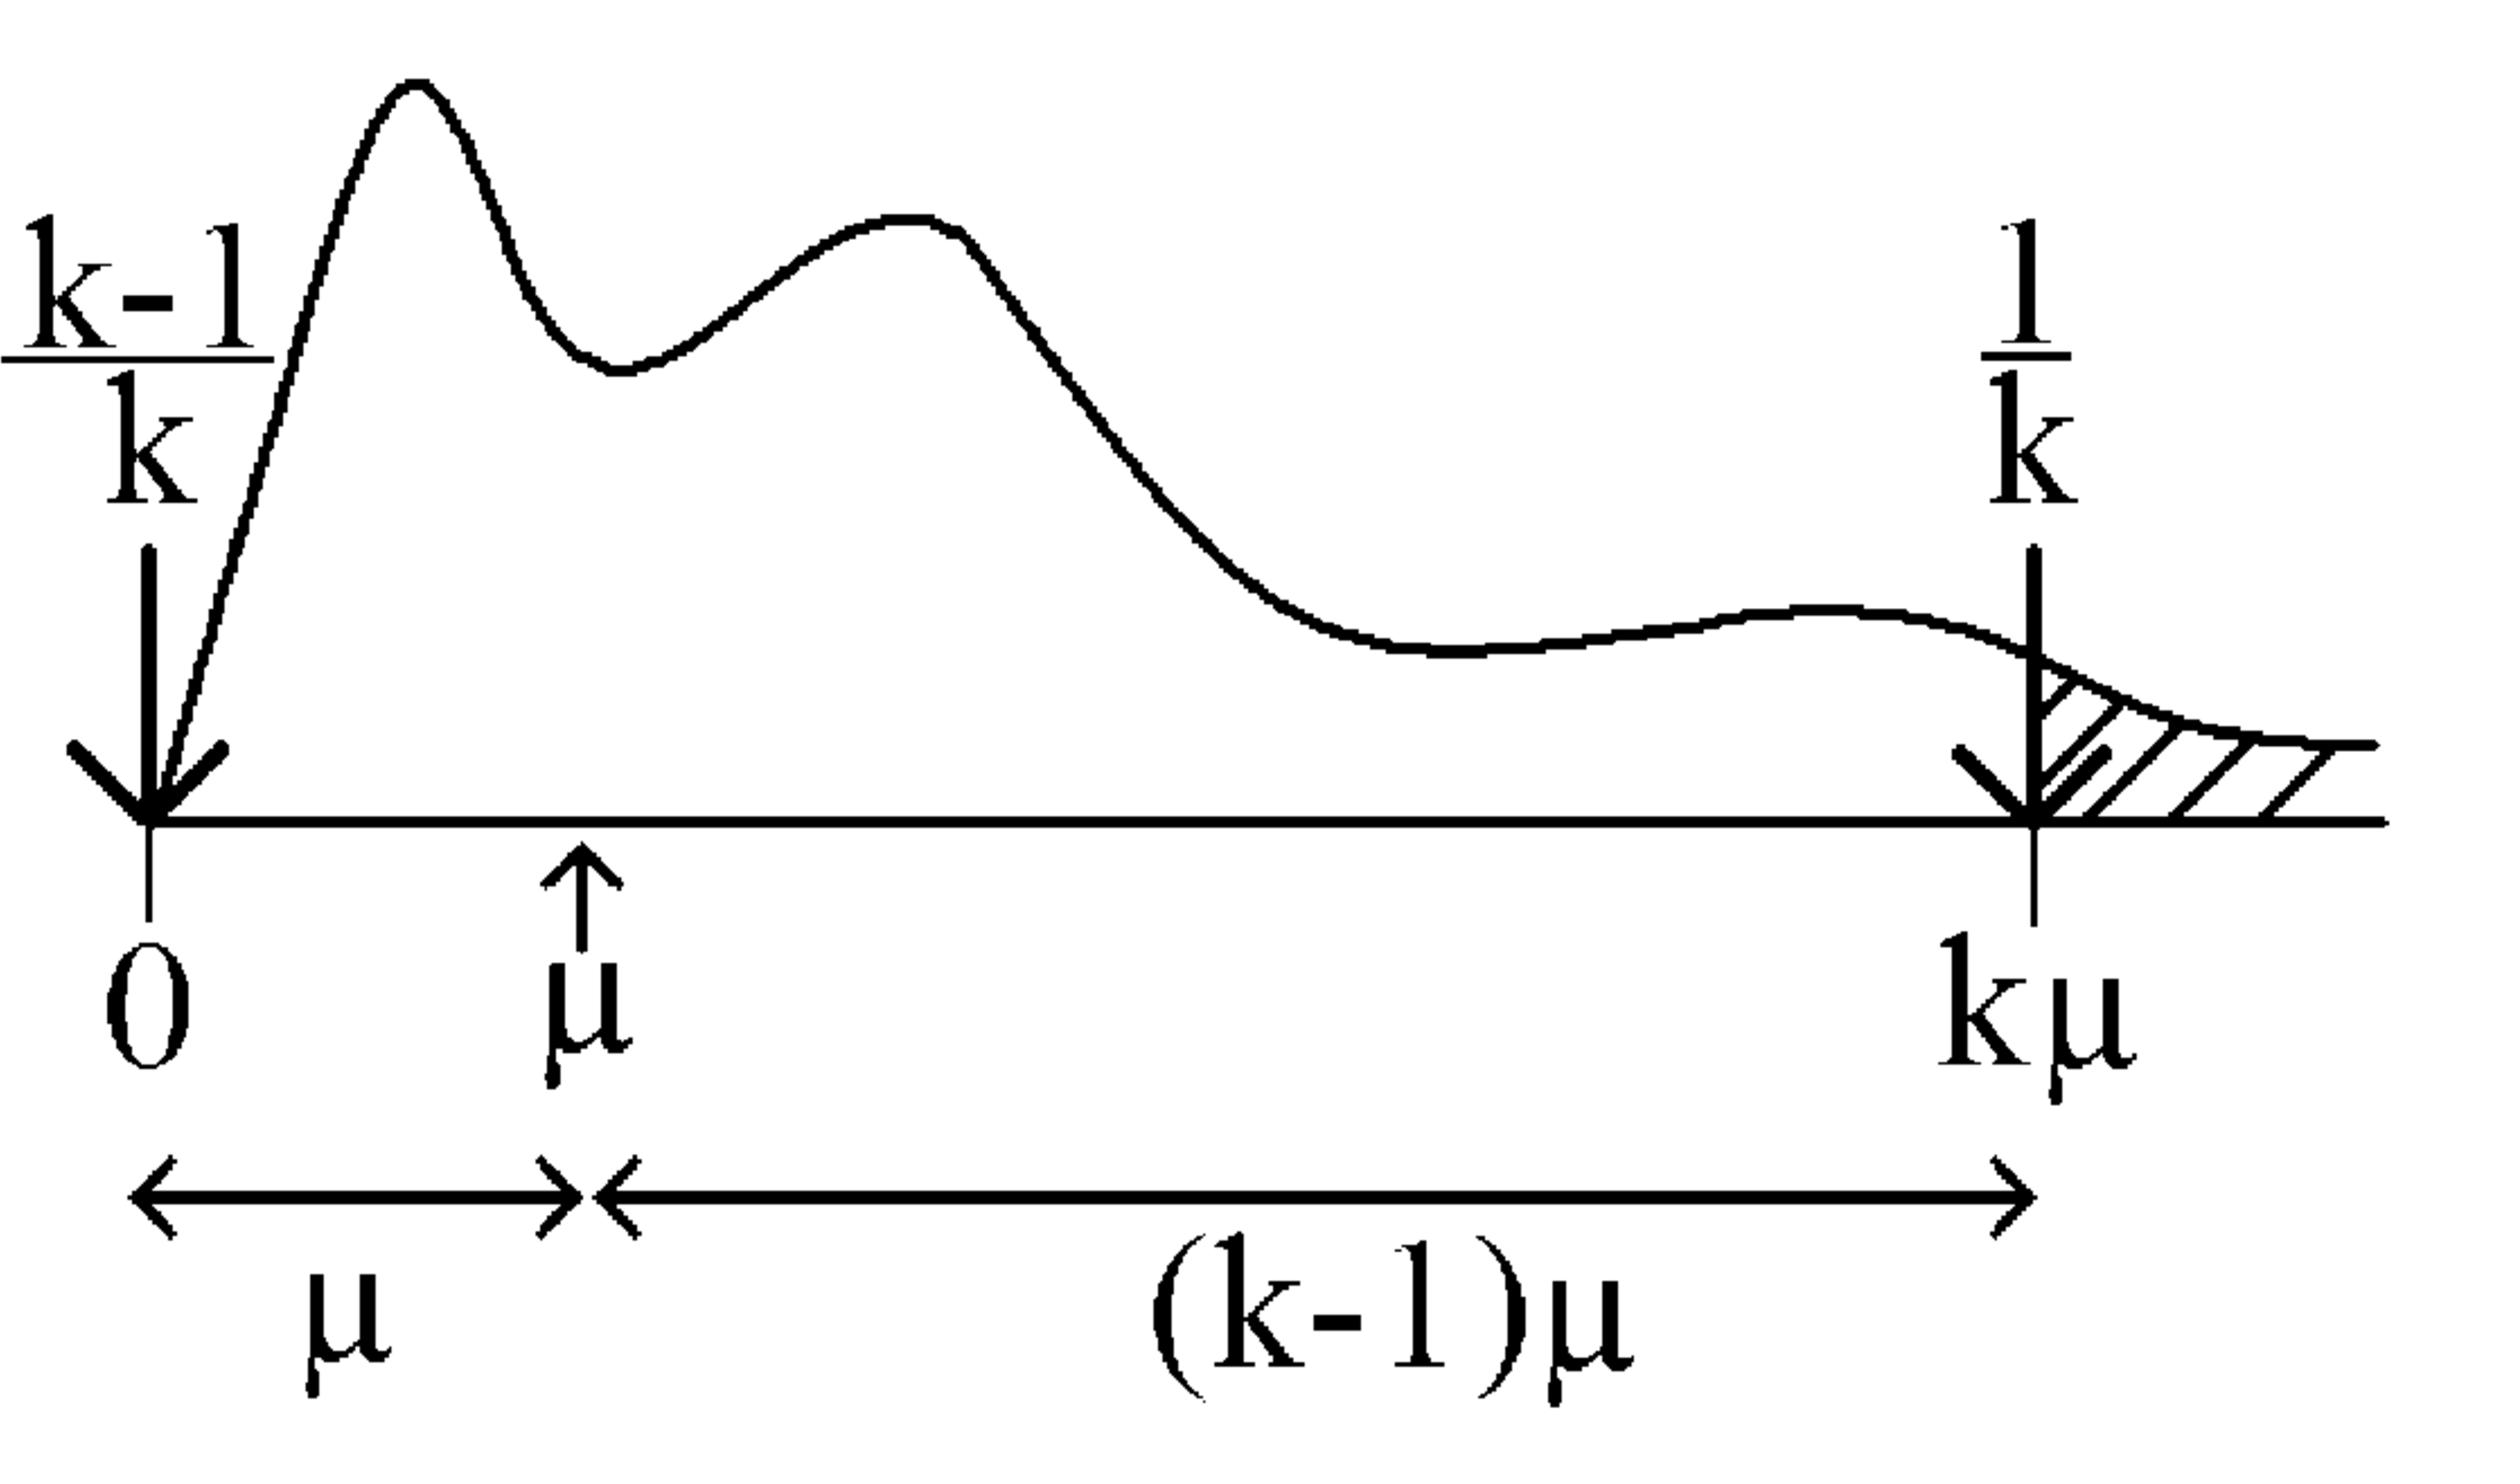 Figure 1: Markov’s inequality interpreted as balancing a seesaw.